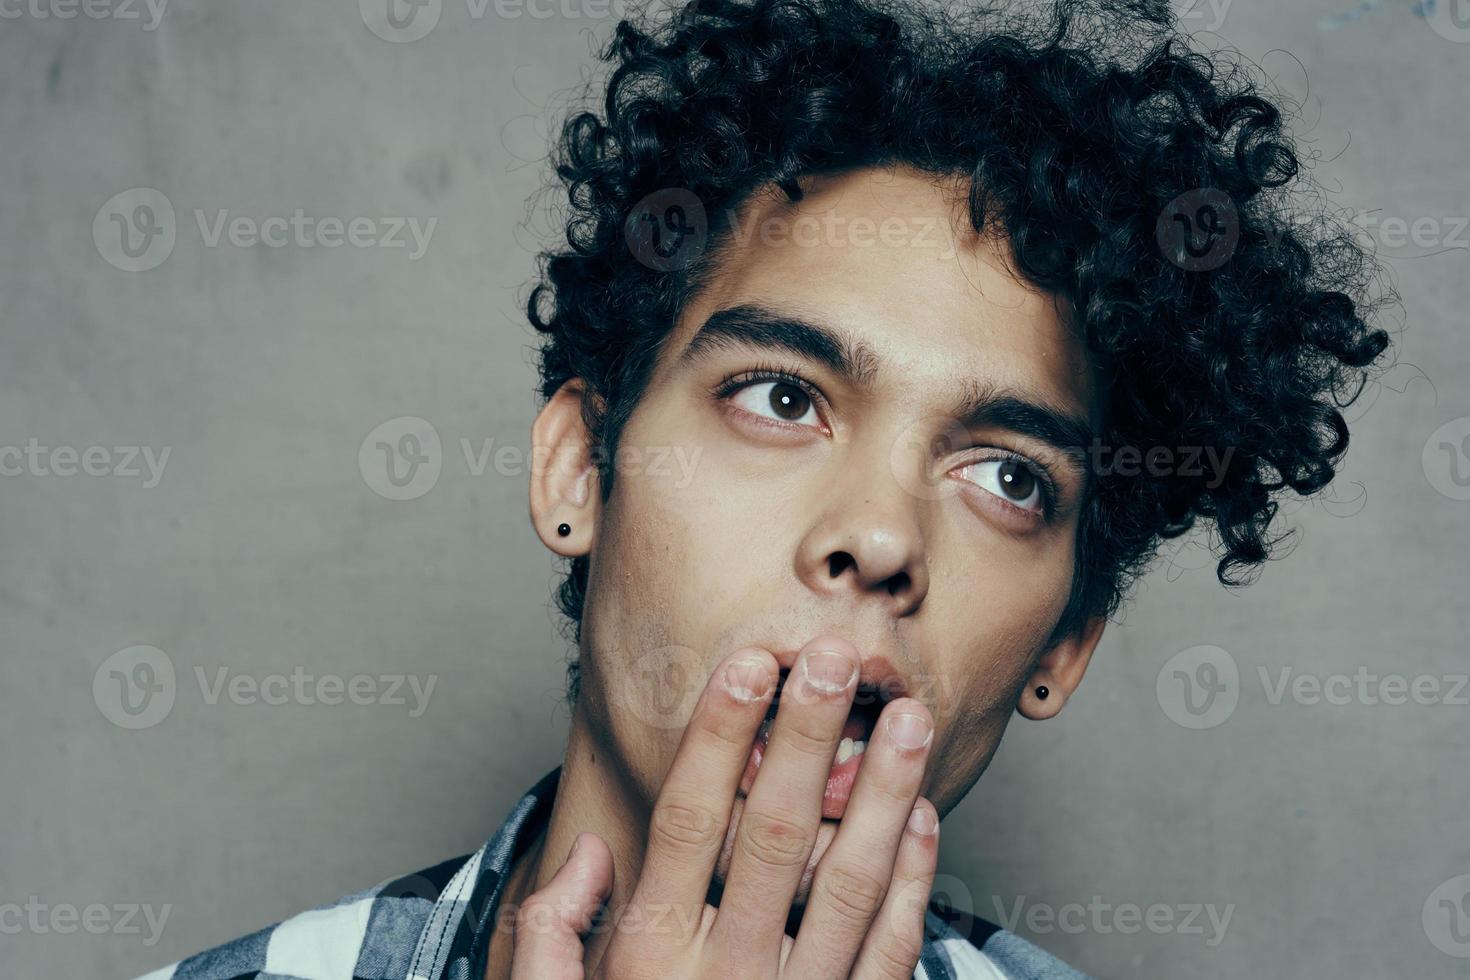 cute guy portrait curly hair emotions gray background model photo